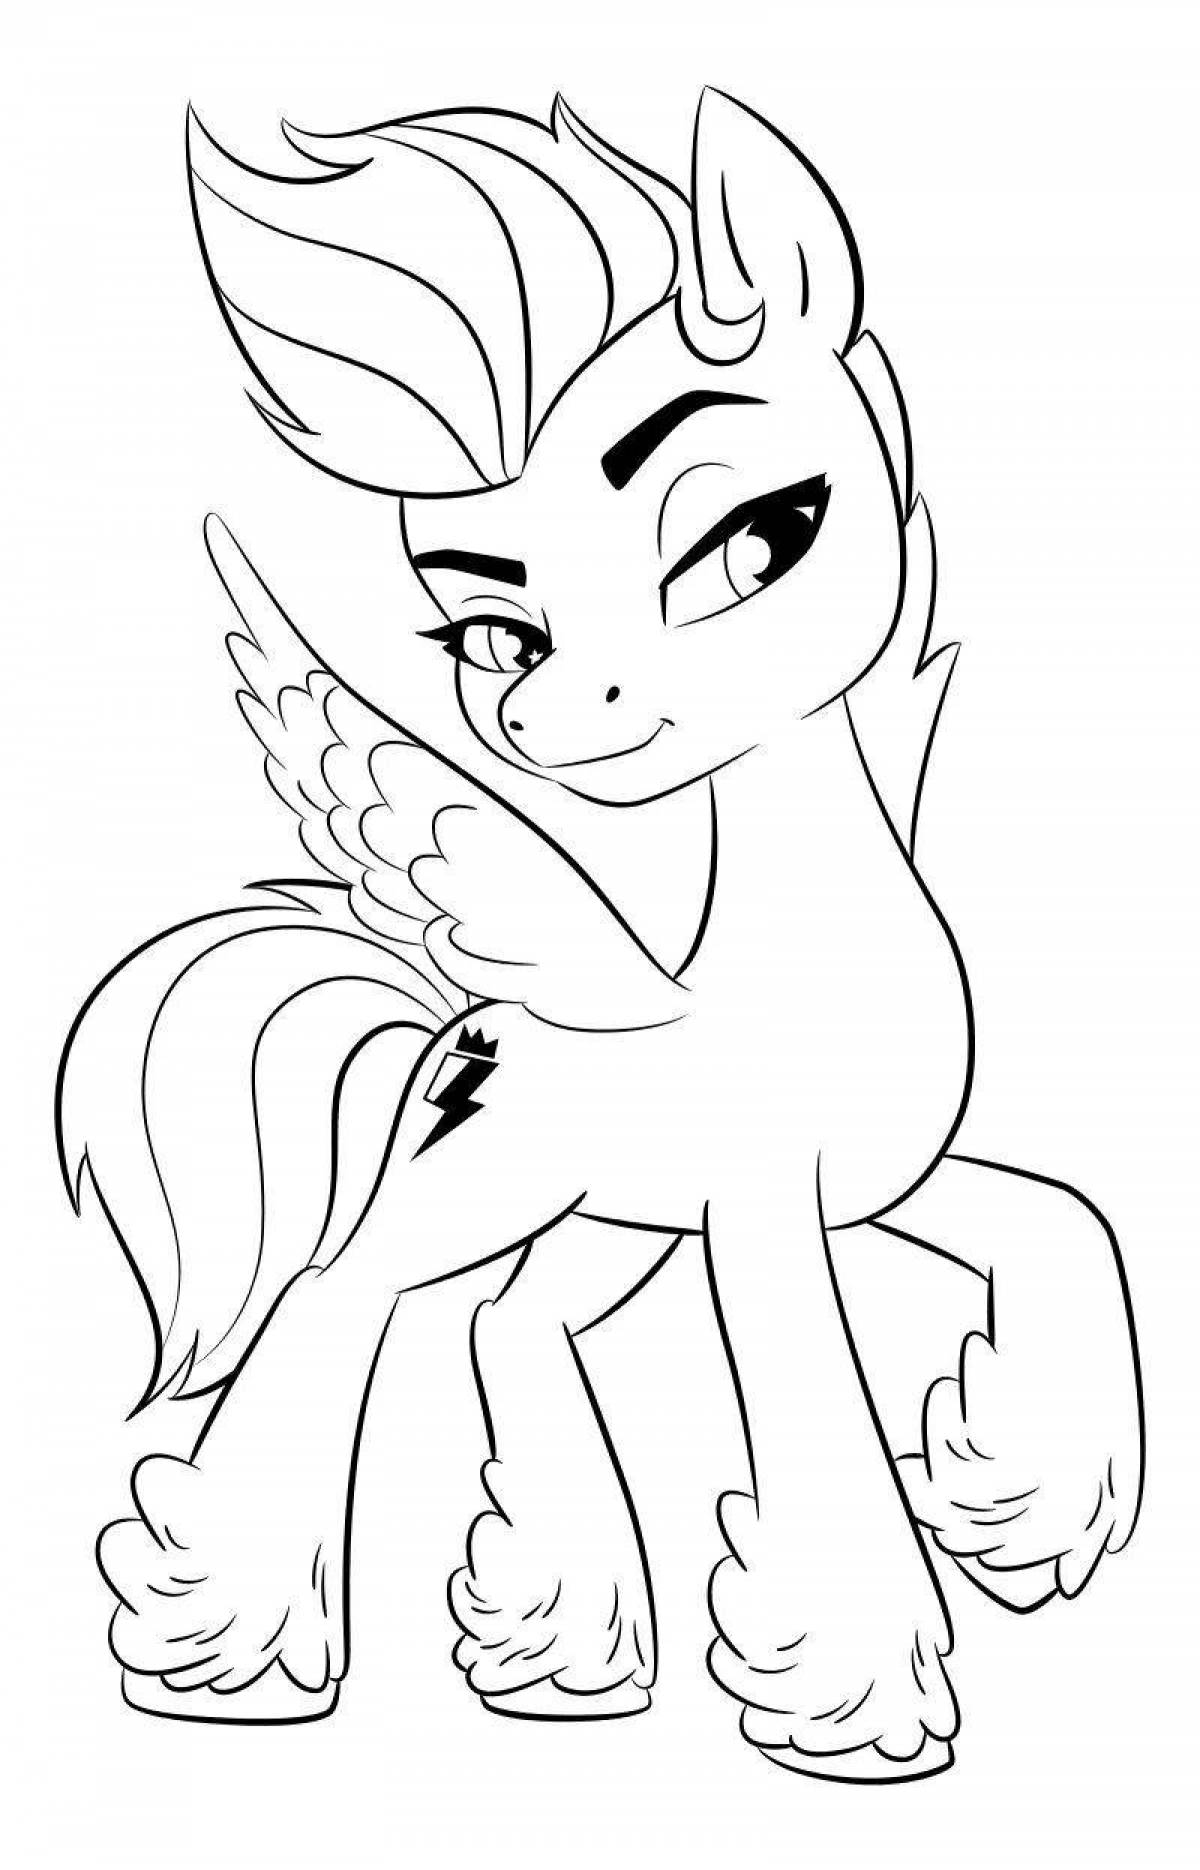 Shine mlp coloring page